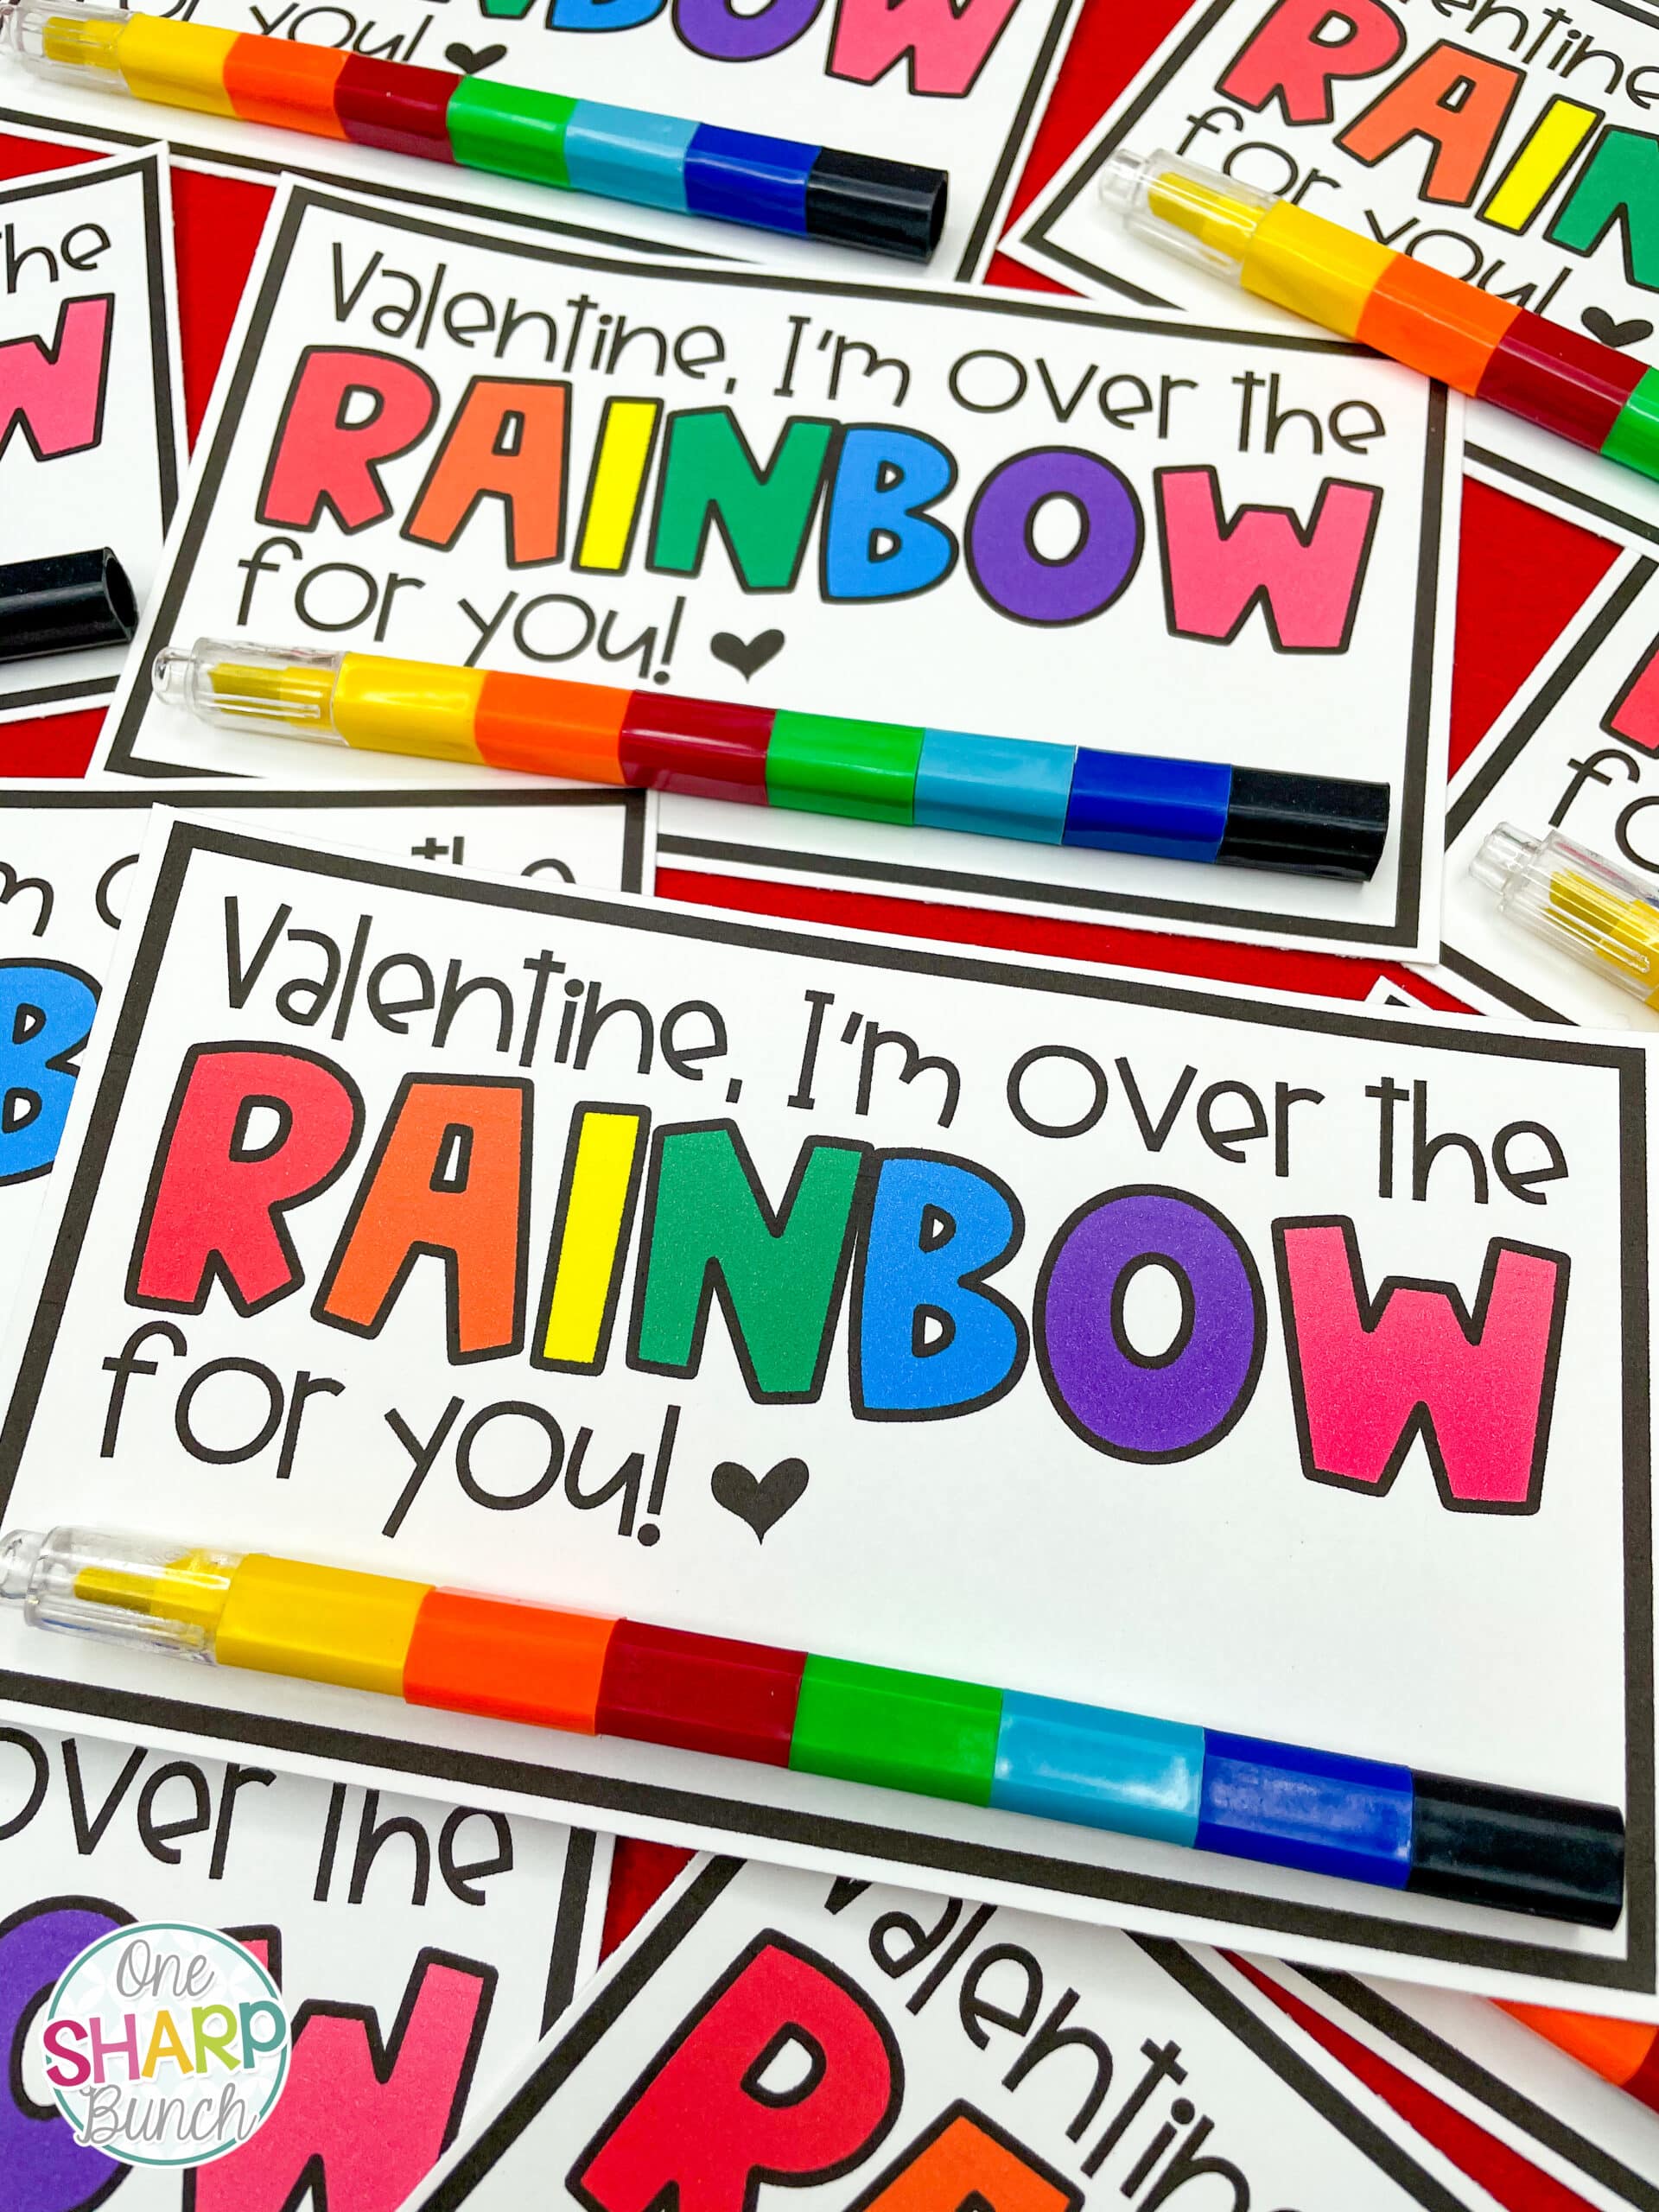 Have fun celebrating Valentine’s Day at your classroom Valentine’s party with these affordable DIY Valentine gifts for students! Your students will love these inexpensive, yet fun, Valentine’s Day student gift ideas! Perfect Valentine’s Day party ideas for Preschool, Kindergarten and 1st Grade! #valentinesday #diyvalentines #valentinesparty #kindergarten #preschool #teachers